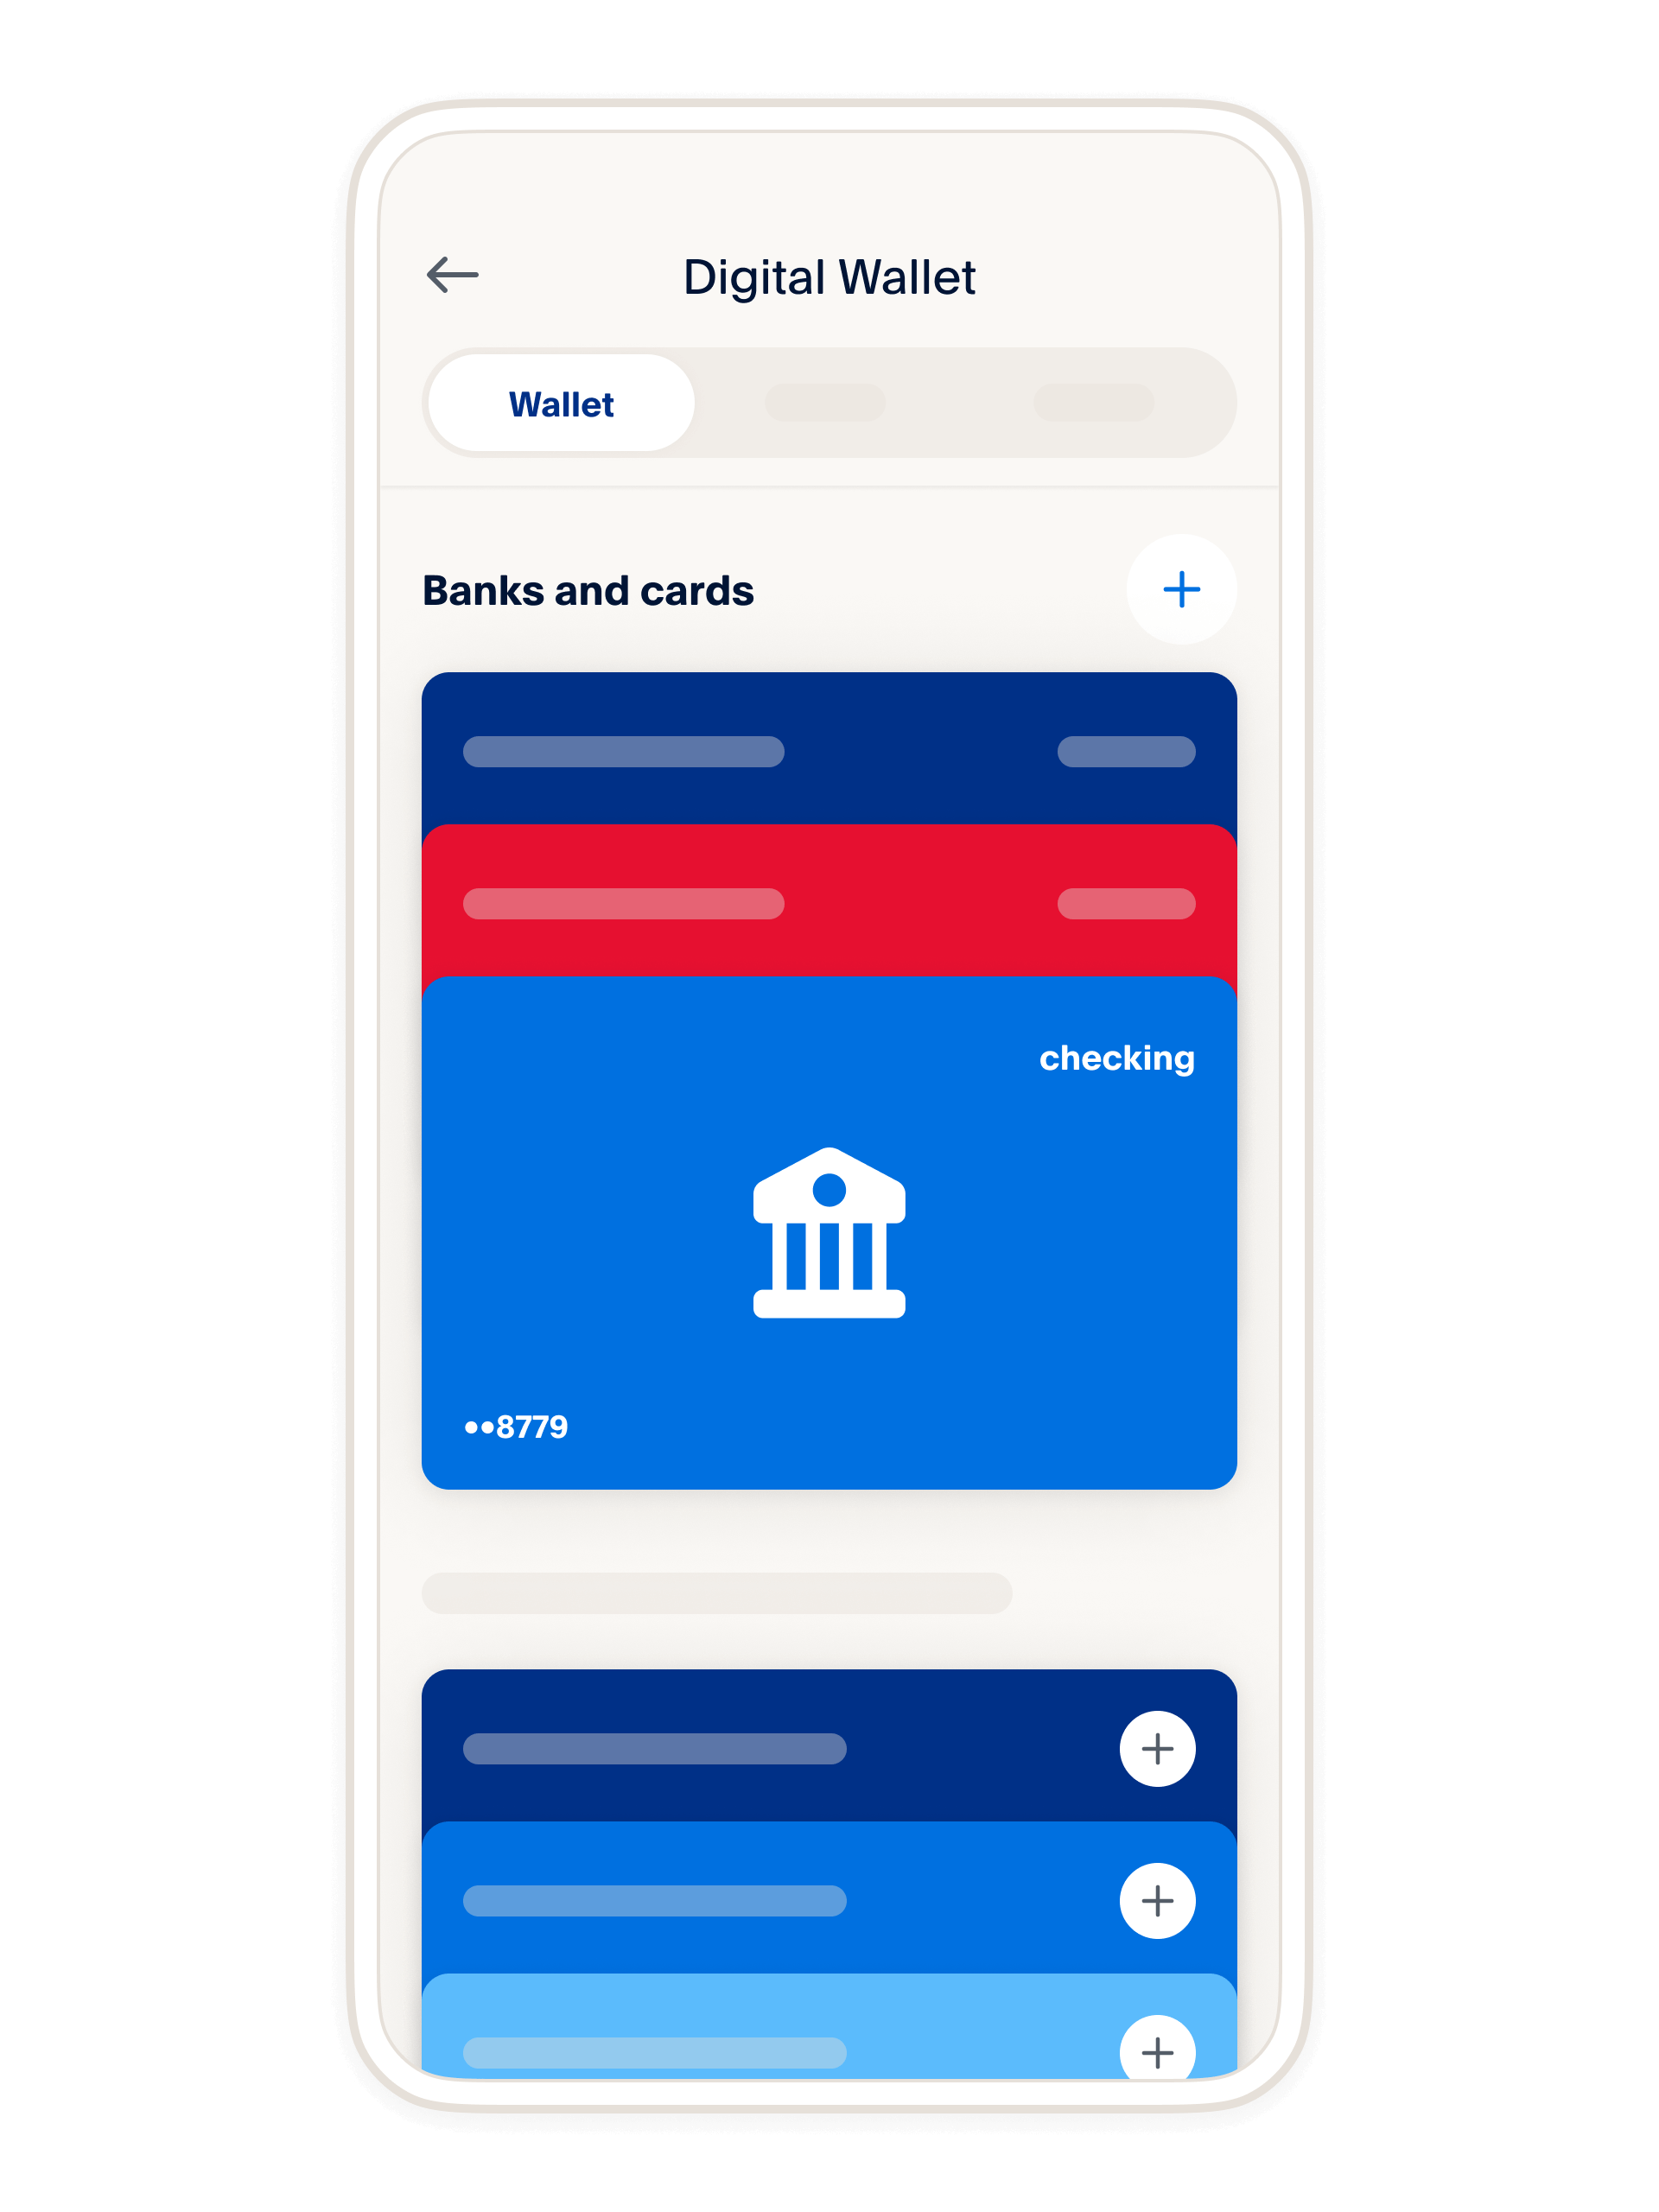 https://www.paypalobjects.com/marketing/web/US/en/rebrand/How-paypal-works/how-paypal-works--graphic-split--add-payment-options-to-your-digital-wallet--ratio=3-4--for=all-v1.png